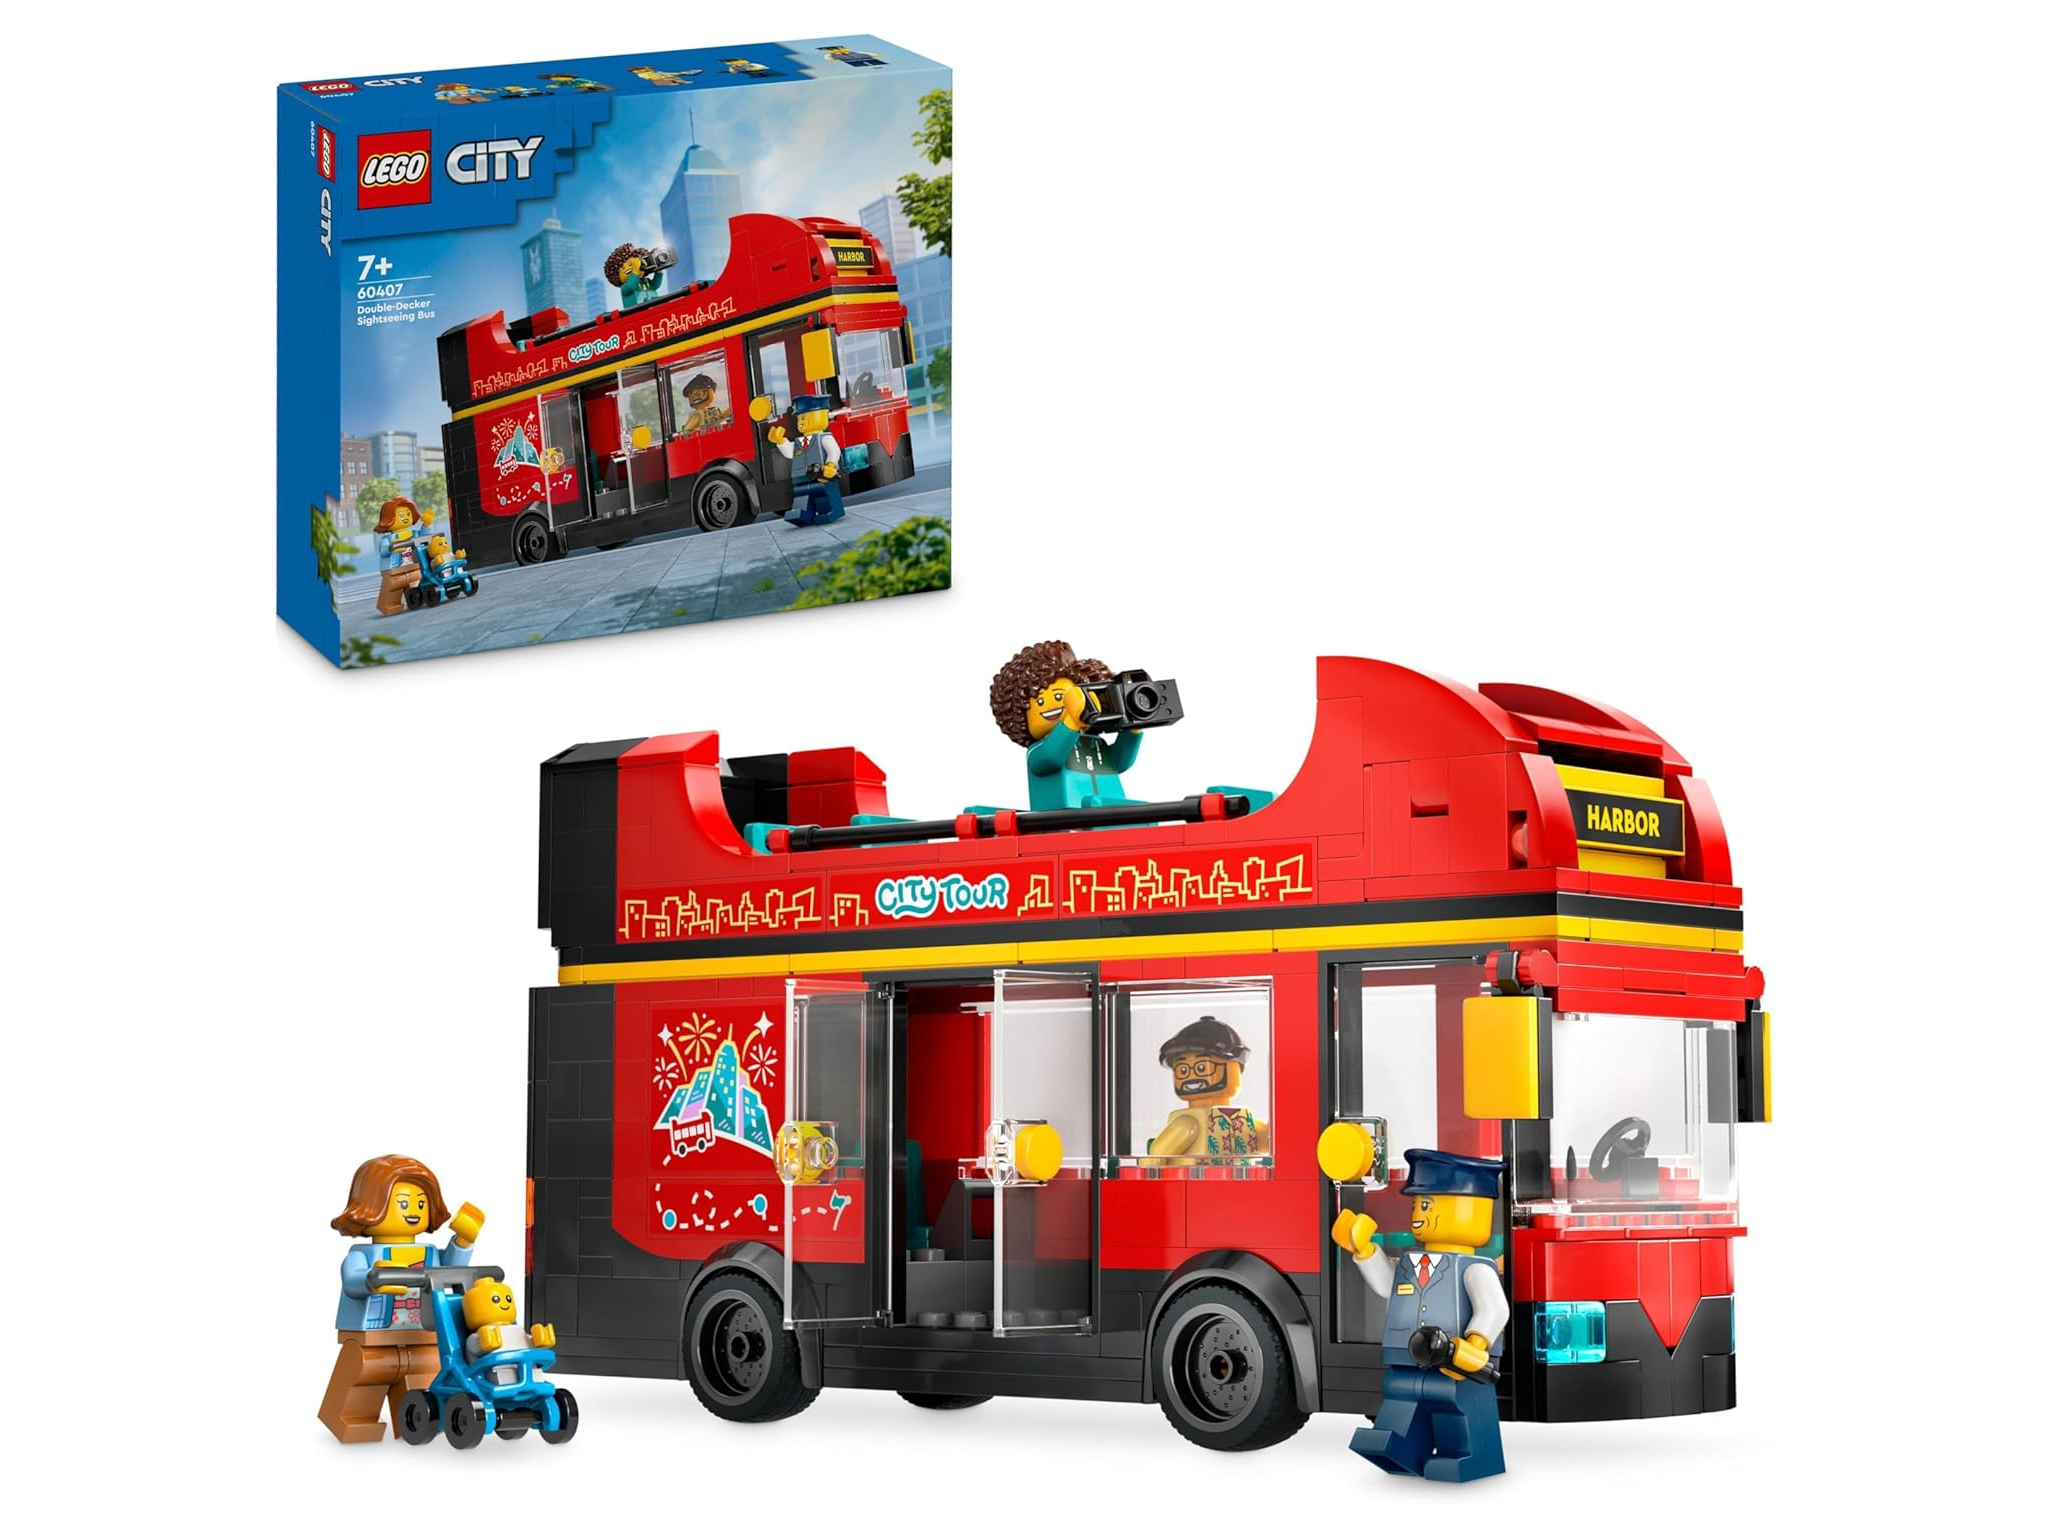 Lego-big-red-bus-best-gifts-for-8-year-olds-review-indybest